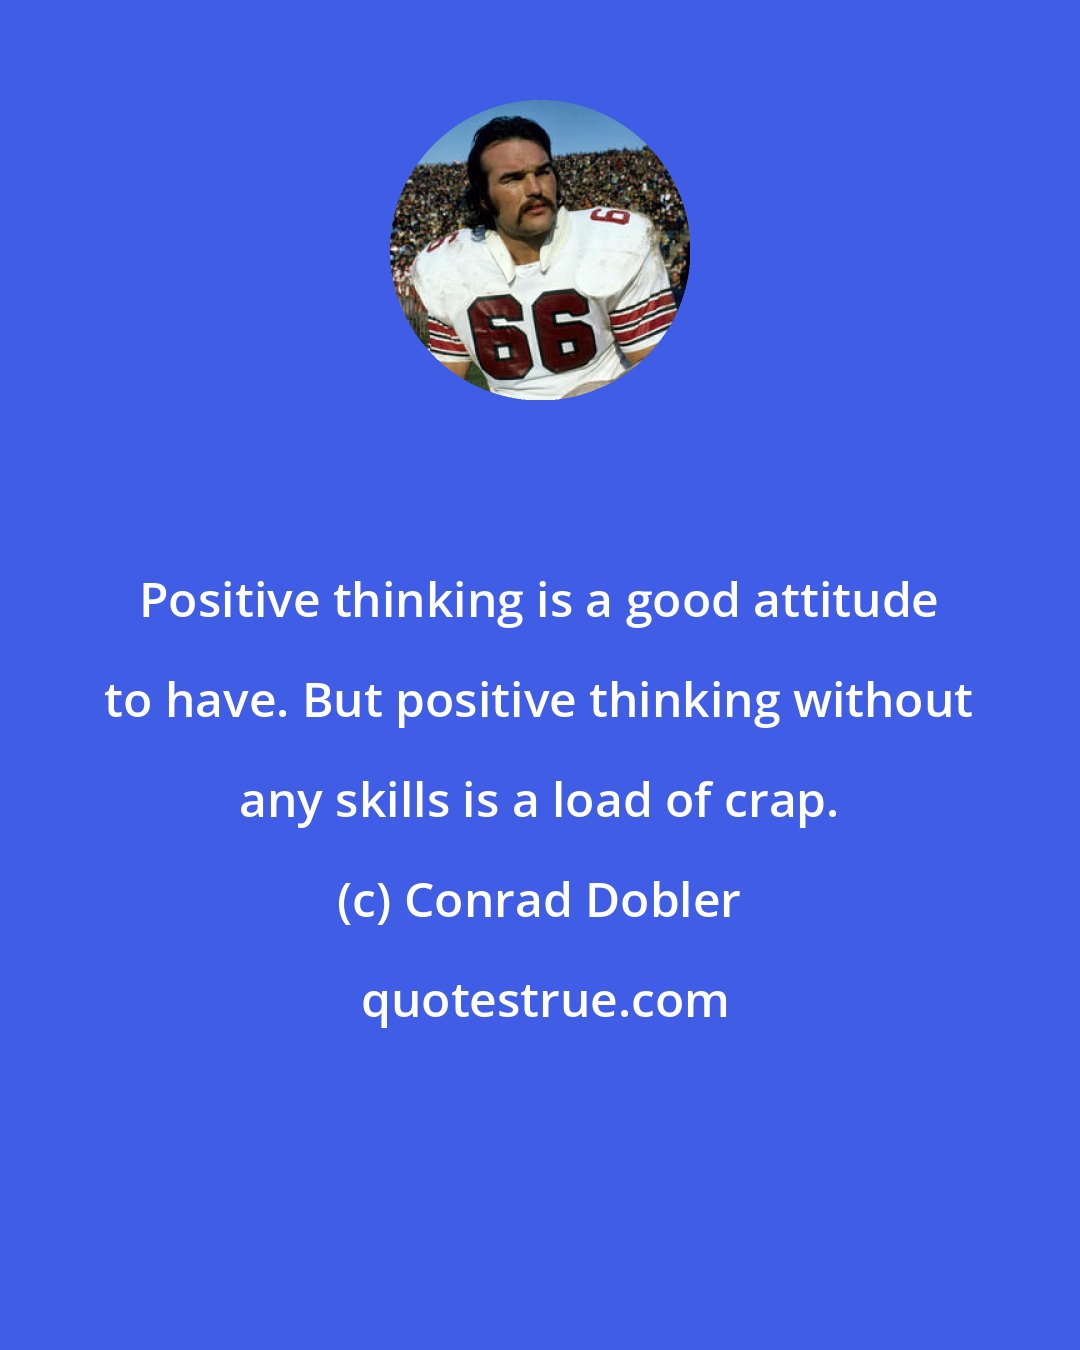 Conrad Dobler: Positive thinking is a good attitude to have. But positive thinking without any skills is a load of crap.